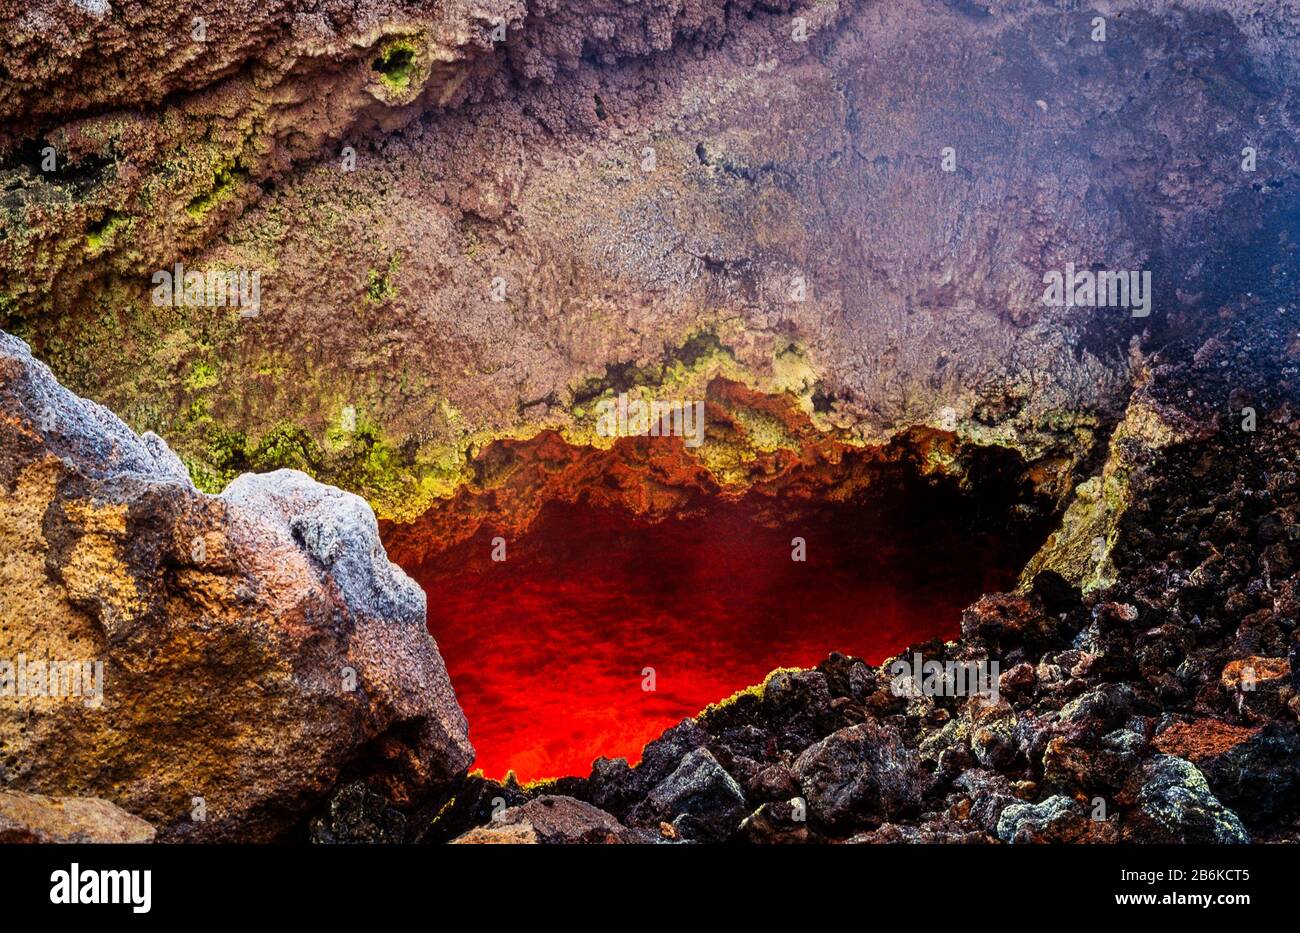 Looking into an active basalt lava flow from the solidified carapace, with  red, incandescent, high temperature, liquid lava flowing beneath Stock Photo